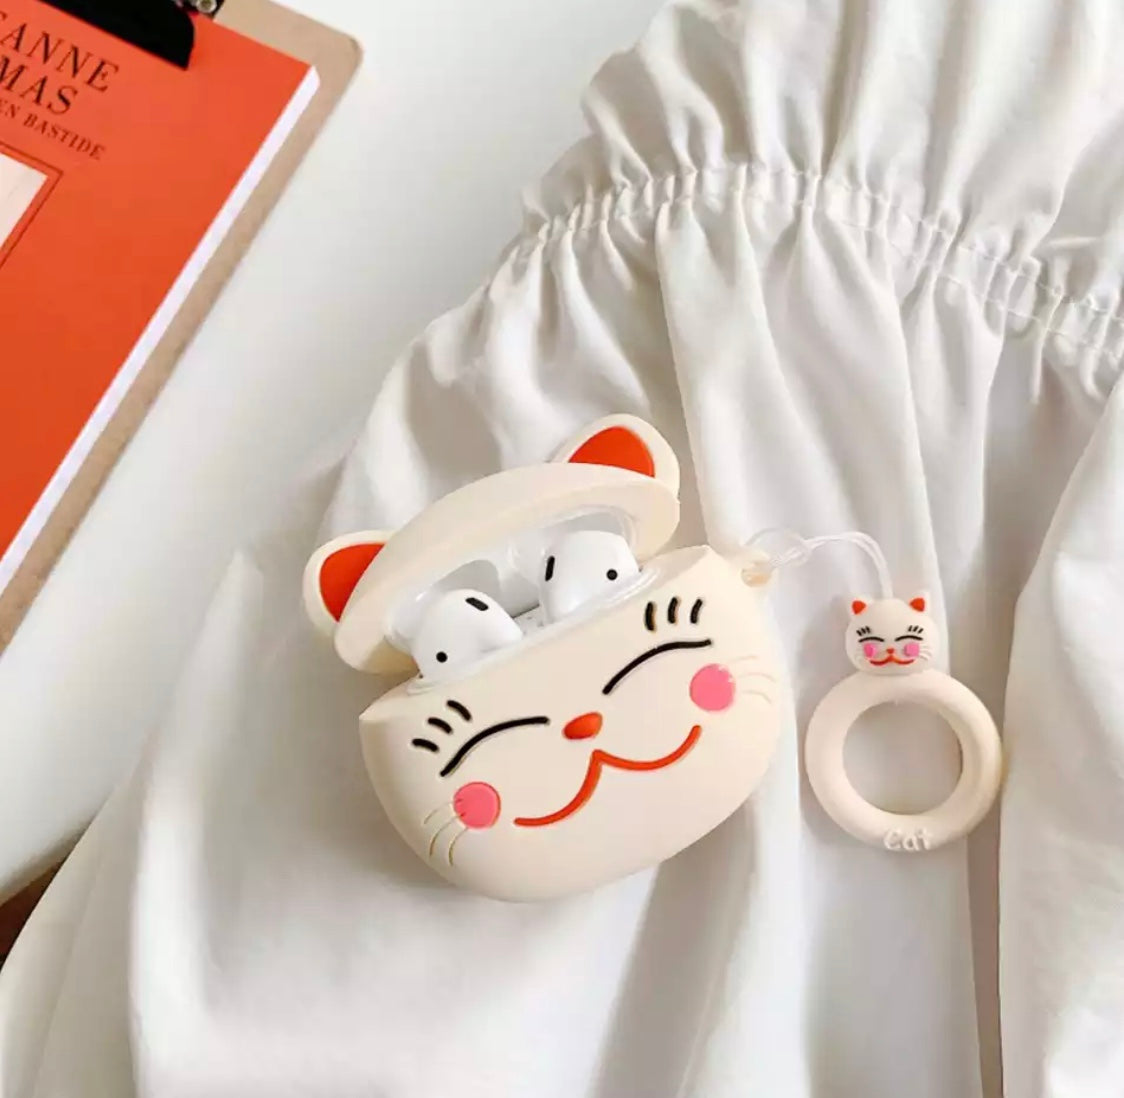 DDLGVERSE Classic Cat AirPods Case White